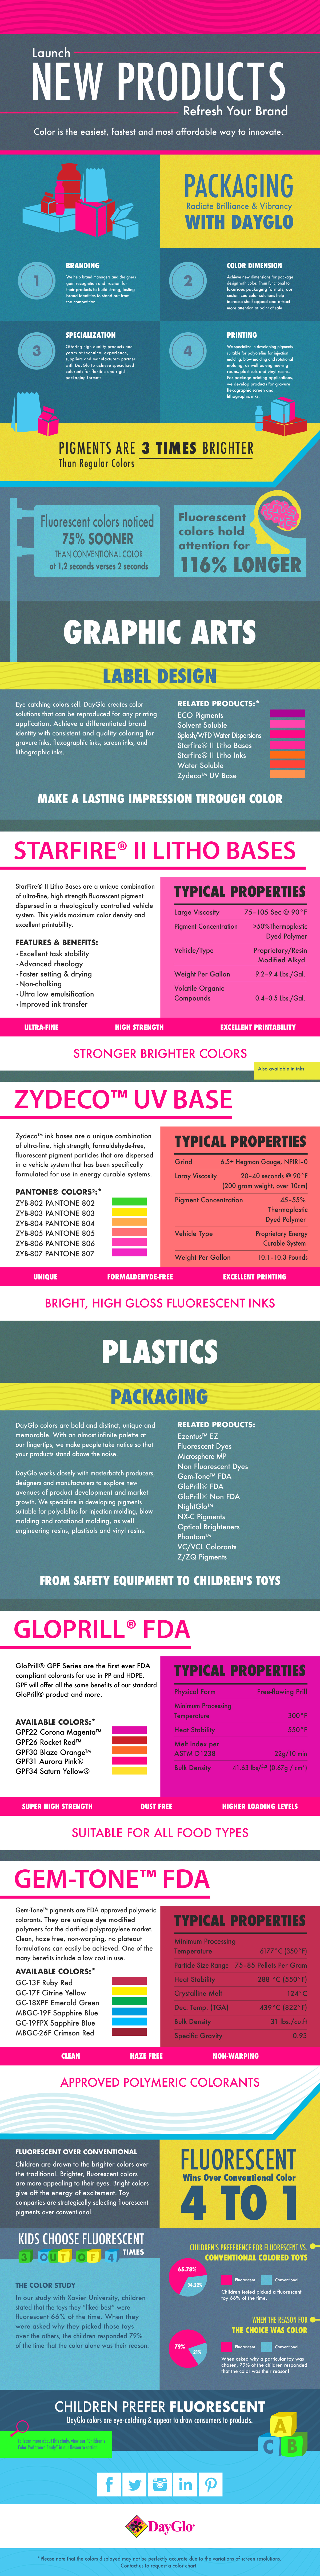 Packaging and Design with DayGlo infographic